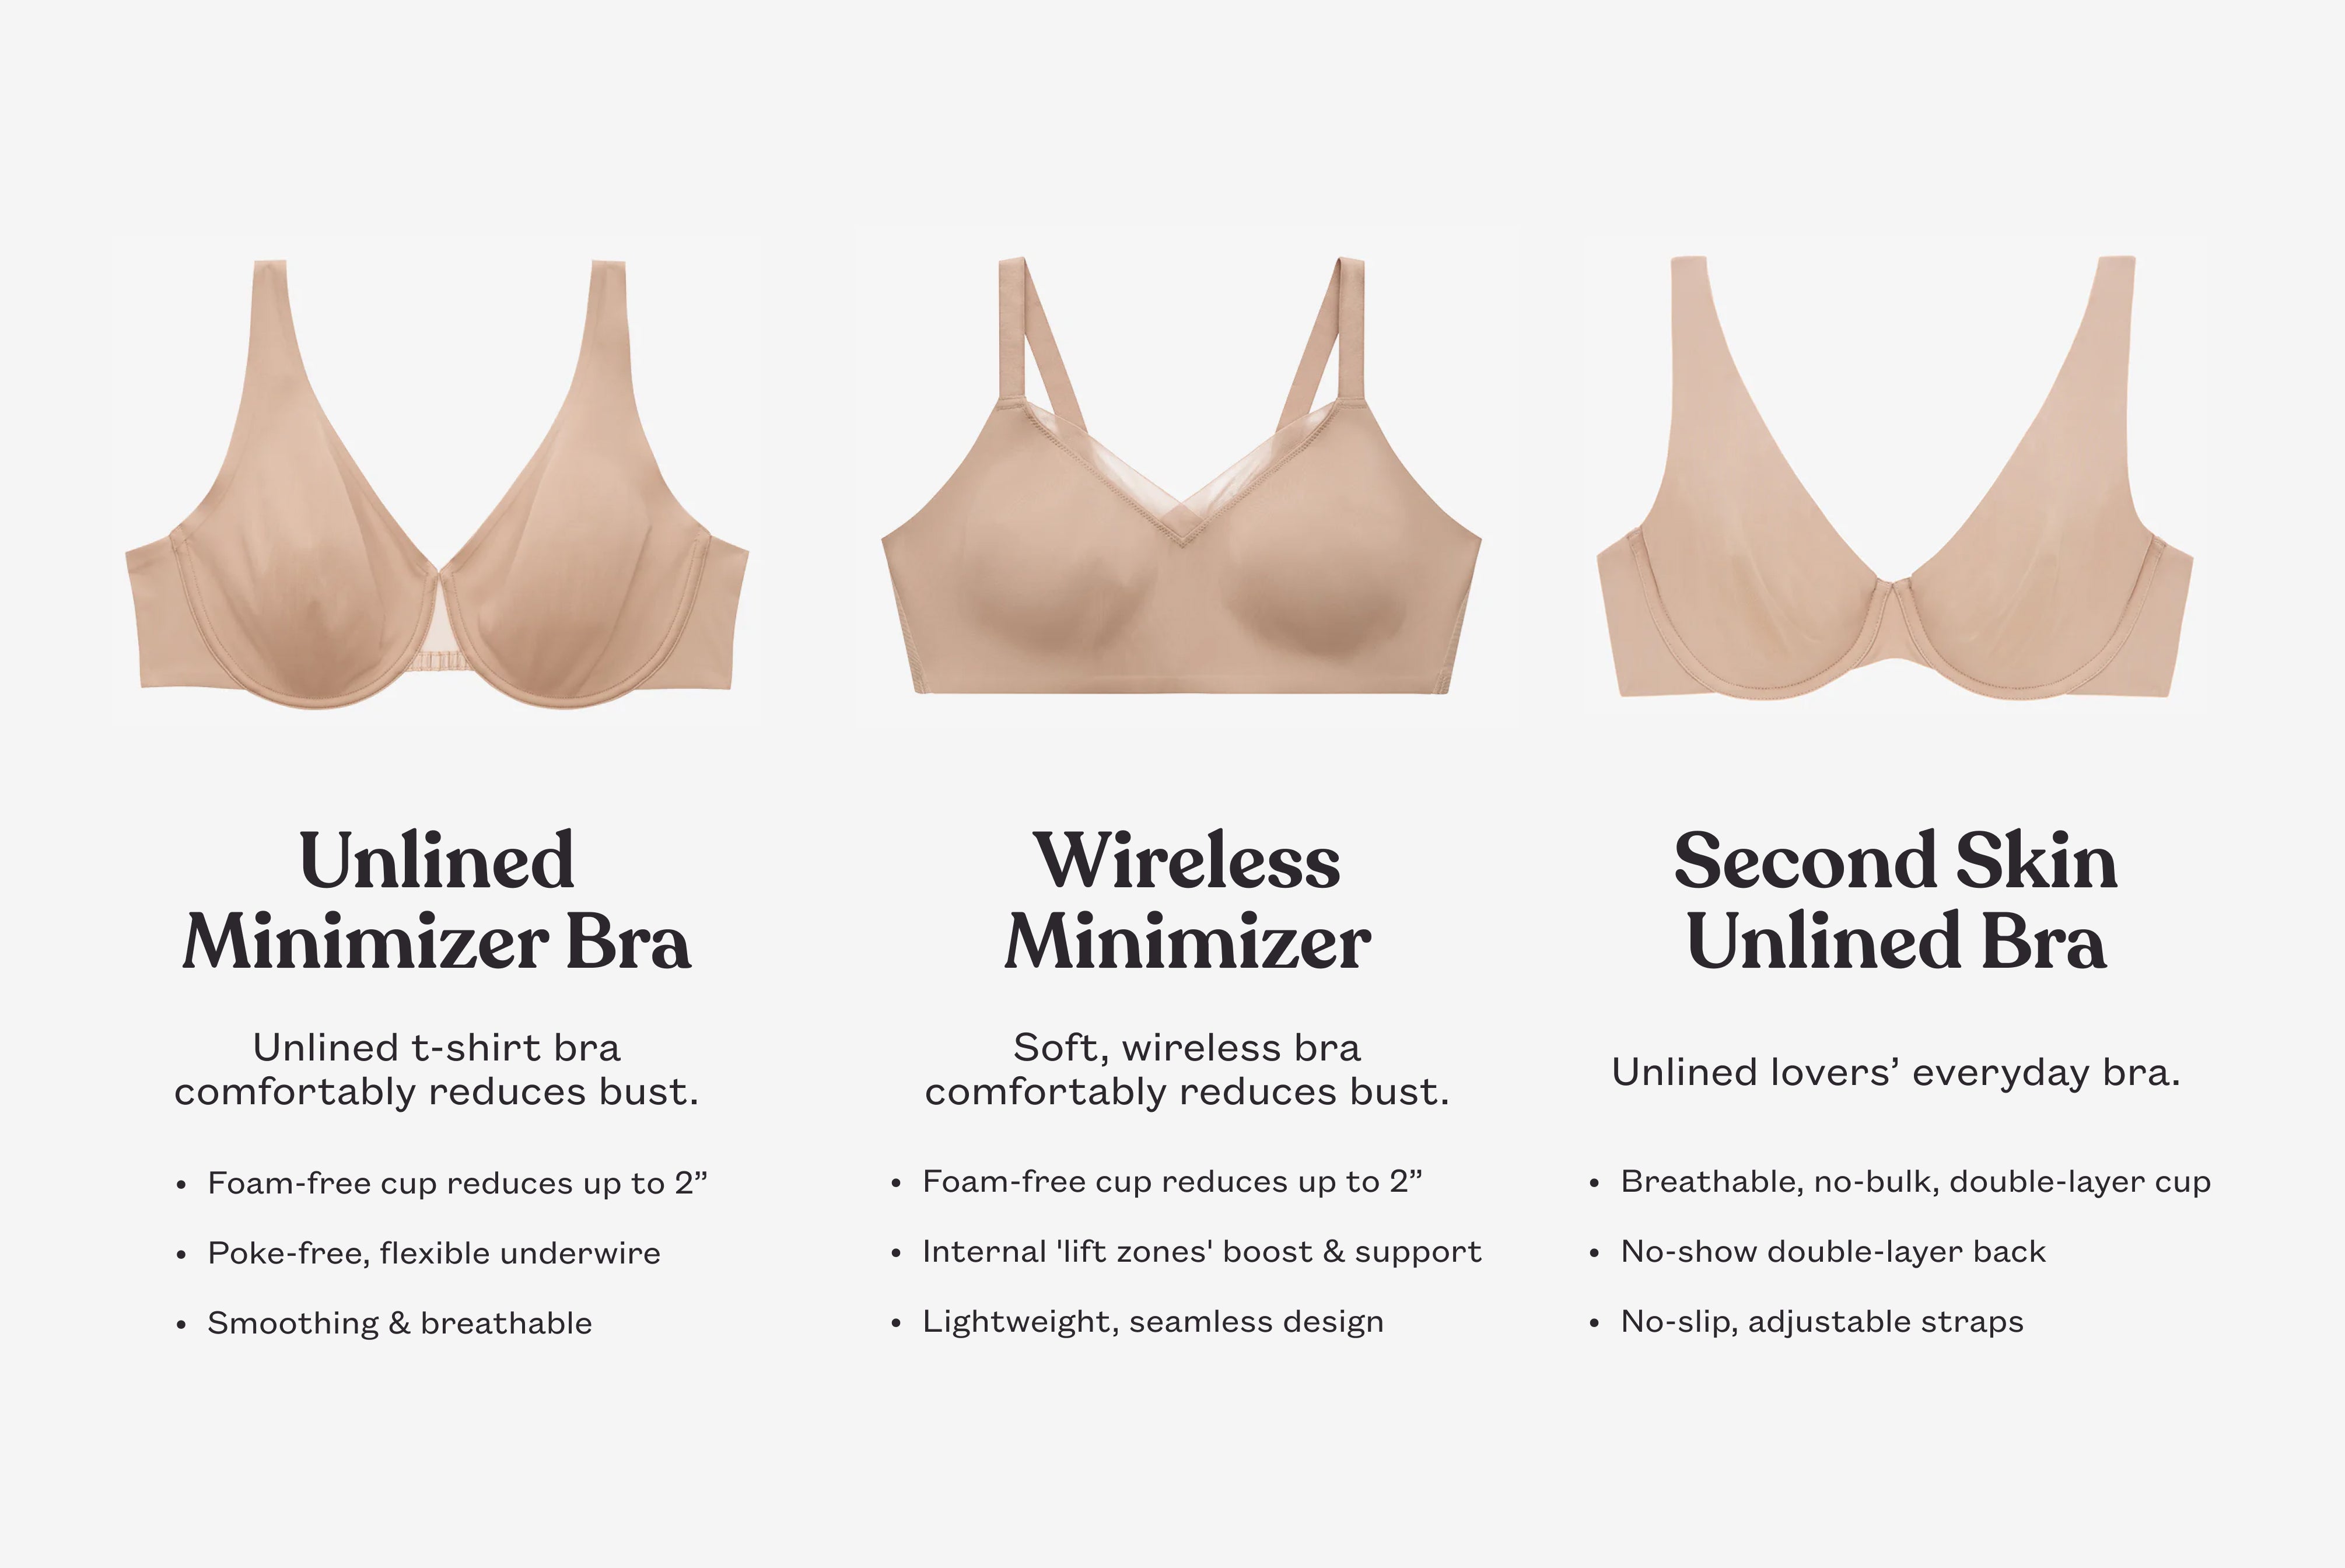 A chart comparing the differences between the following unlined bras: ThirdLove's Second Skin Unlined Bra, ThirdLove's Unlined Minimizer Bra, and ThirdLove's Wireless Minimizer.